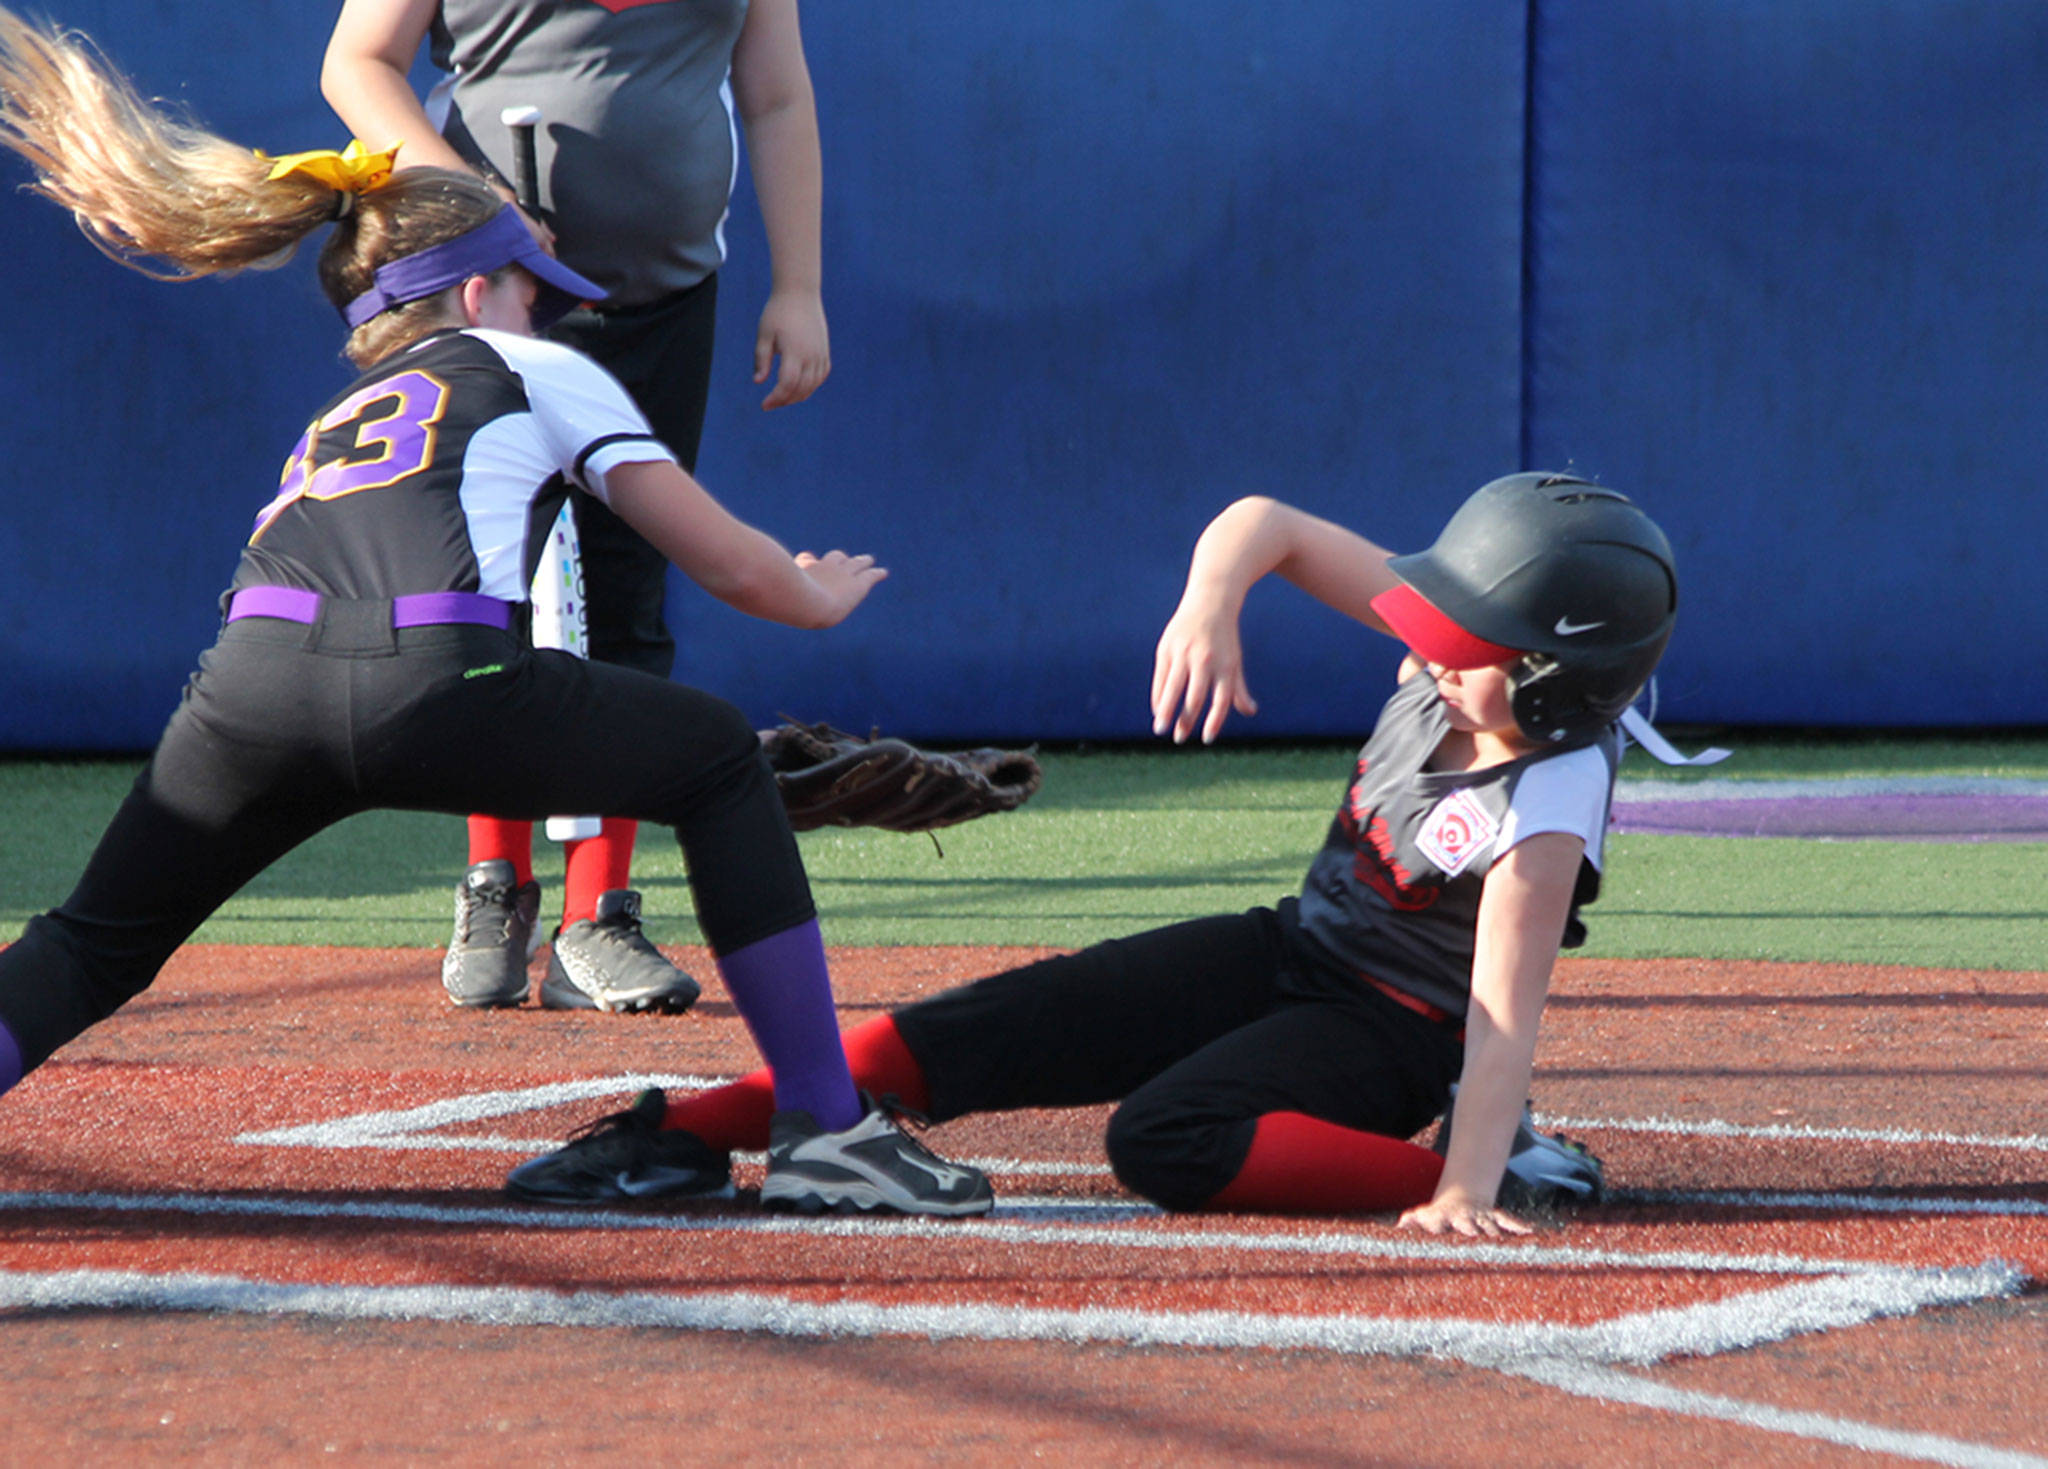 Central Whidbey’s Taylor Brotemarkle slides under the tag of Reese Wasinger. (Photo by Jim Waller/Whidbey News-Times)